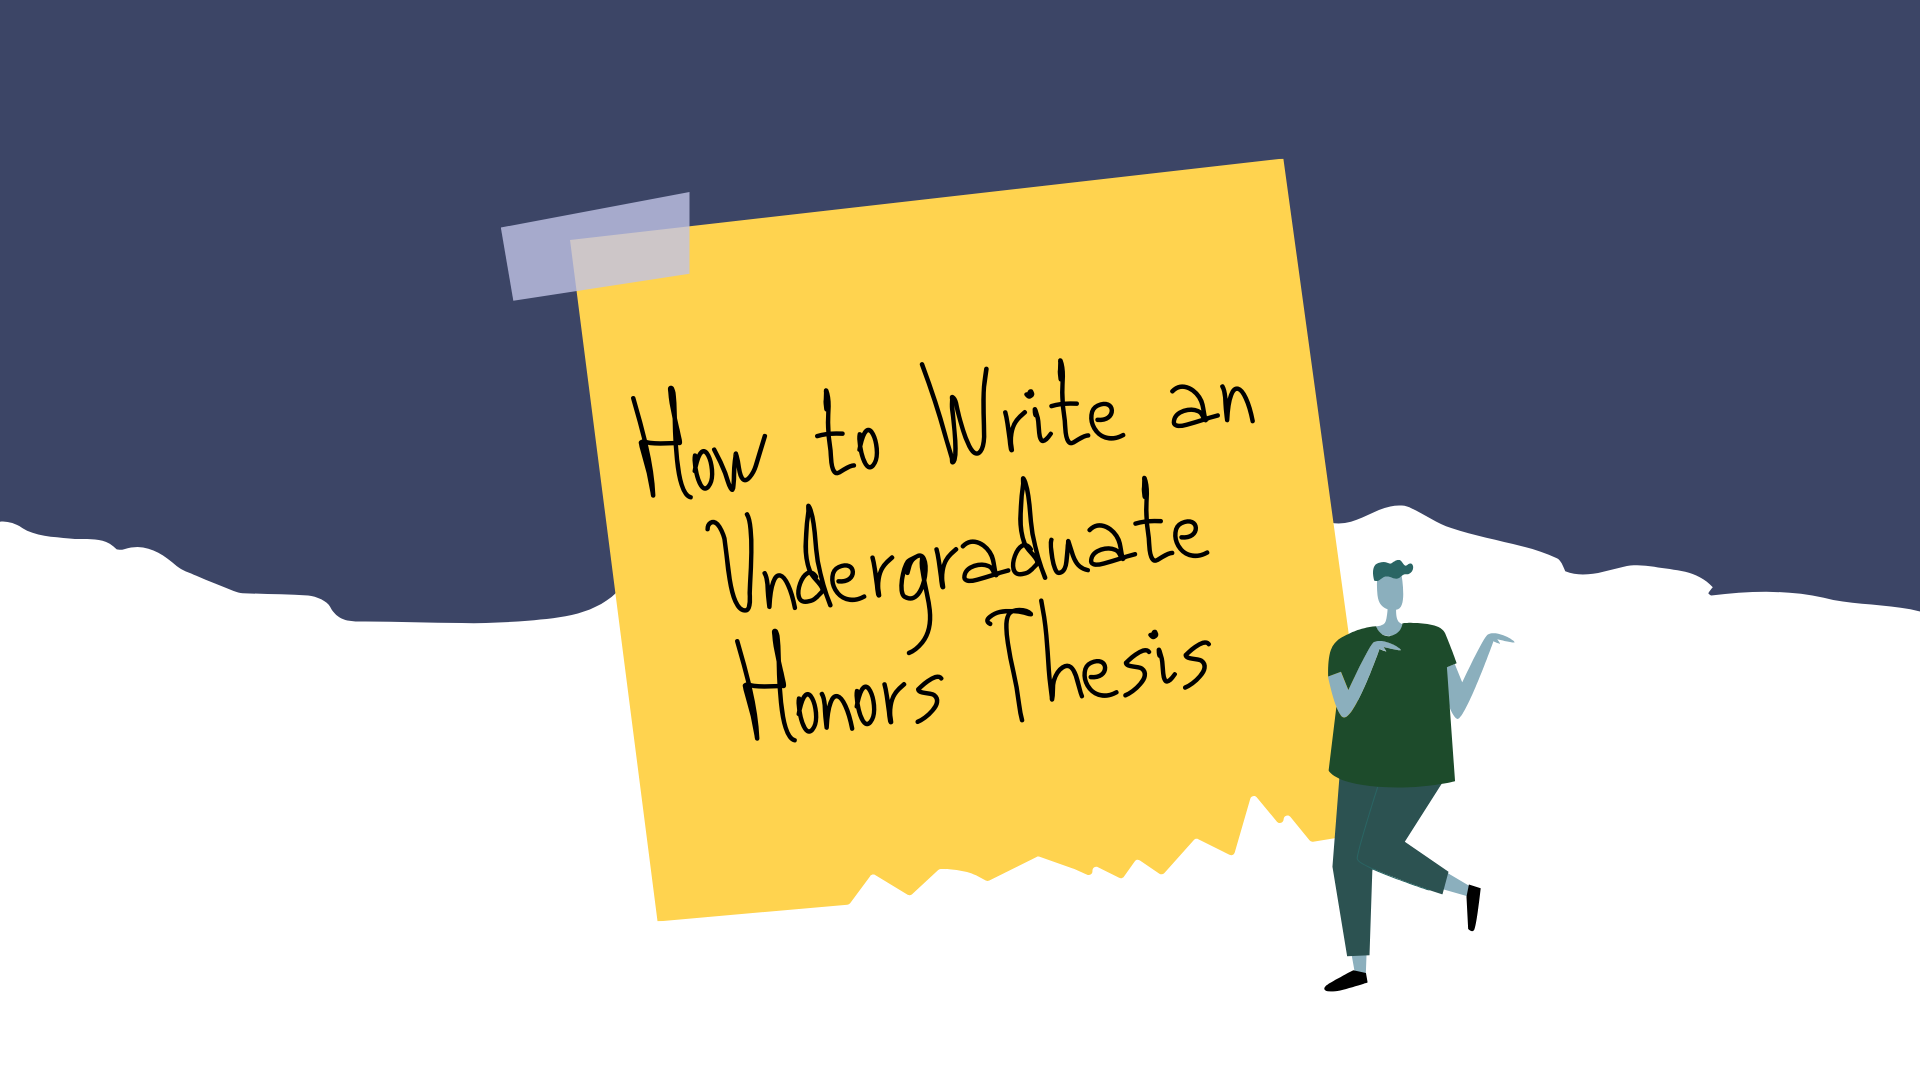 honours thesis uleth